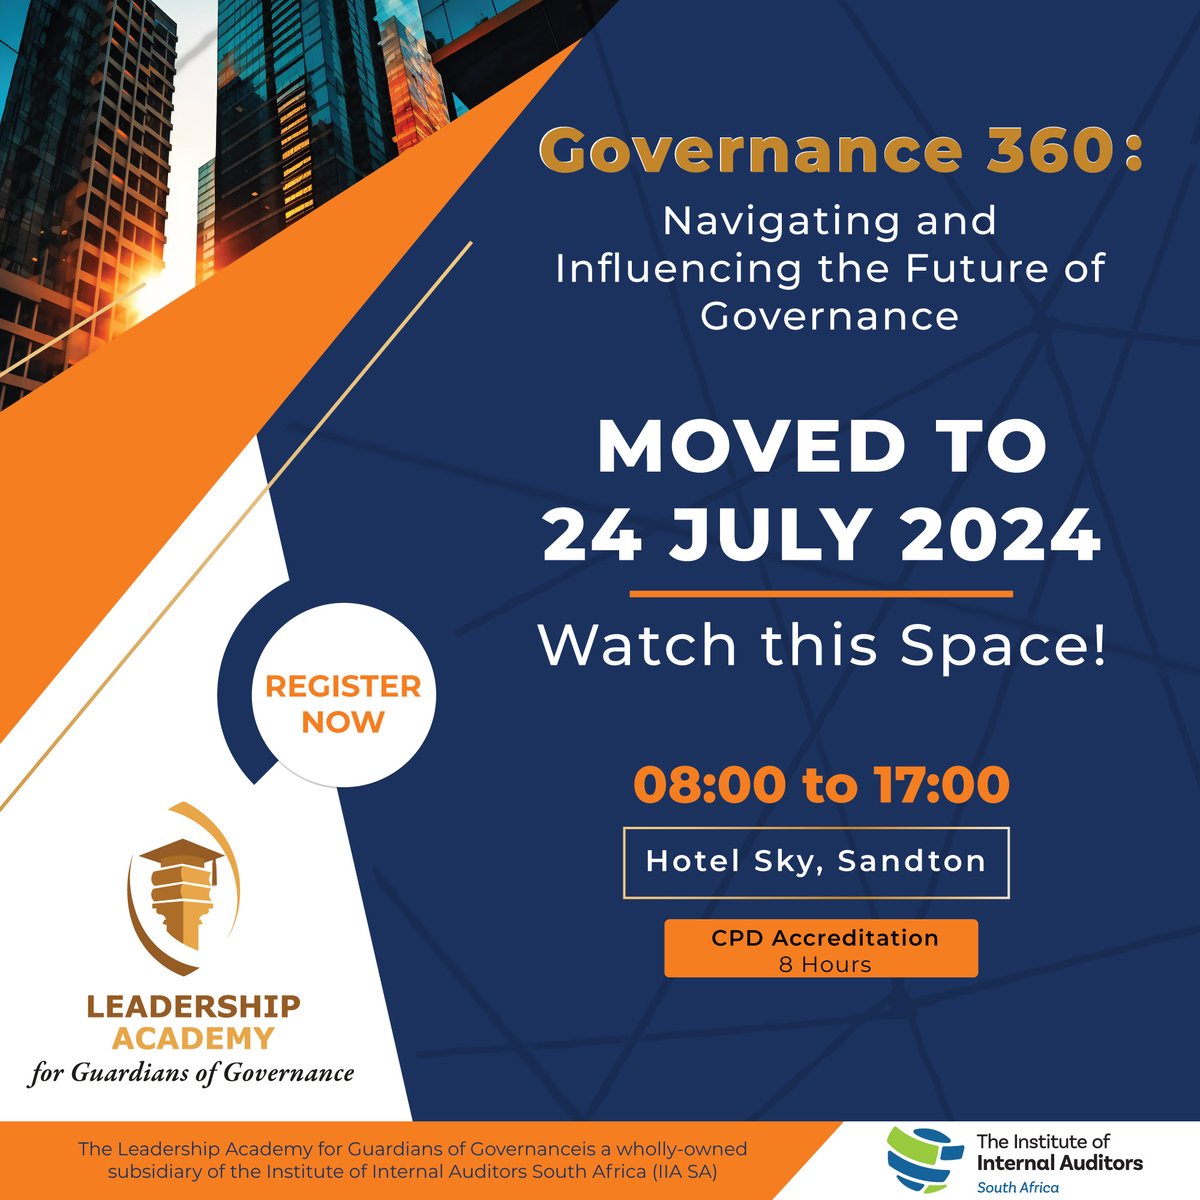 The Governance 360: Navigating and Influencing the Future of Governance Conference has been rescheduled to 24th July. Stay tuned for further updates and exciting announcements! For more information, email: governance360@governanceacademy.co.za

#Governance360
#WatchTheSpace